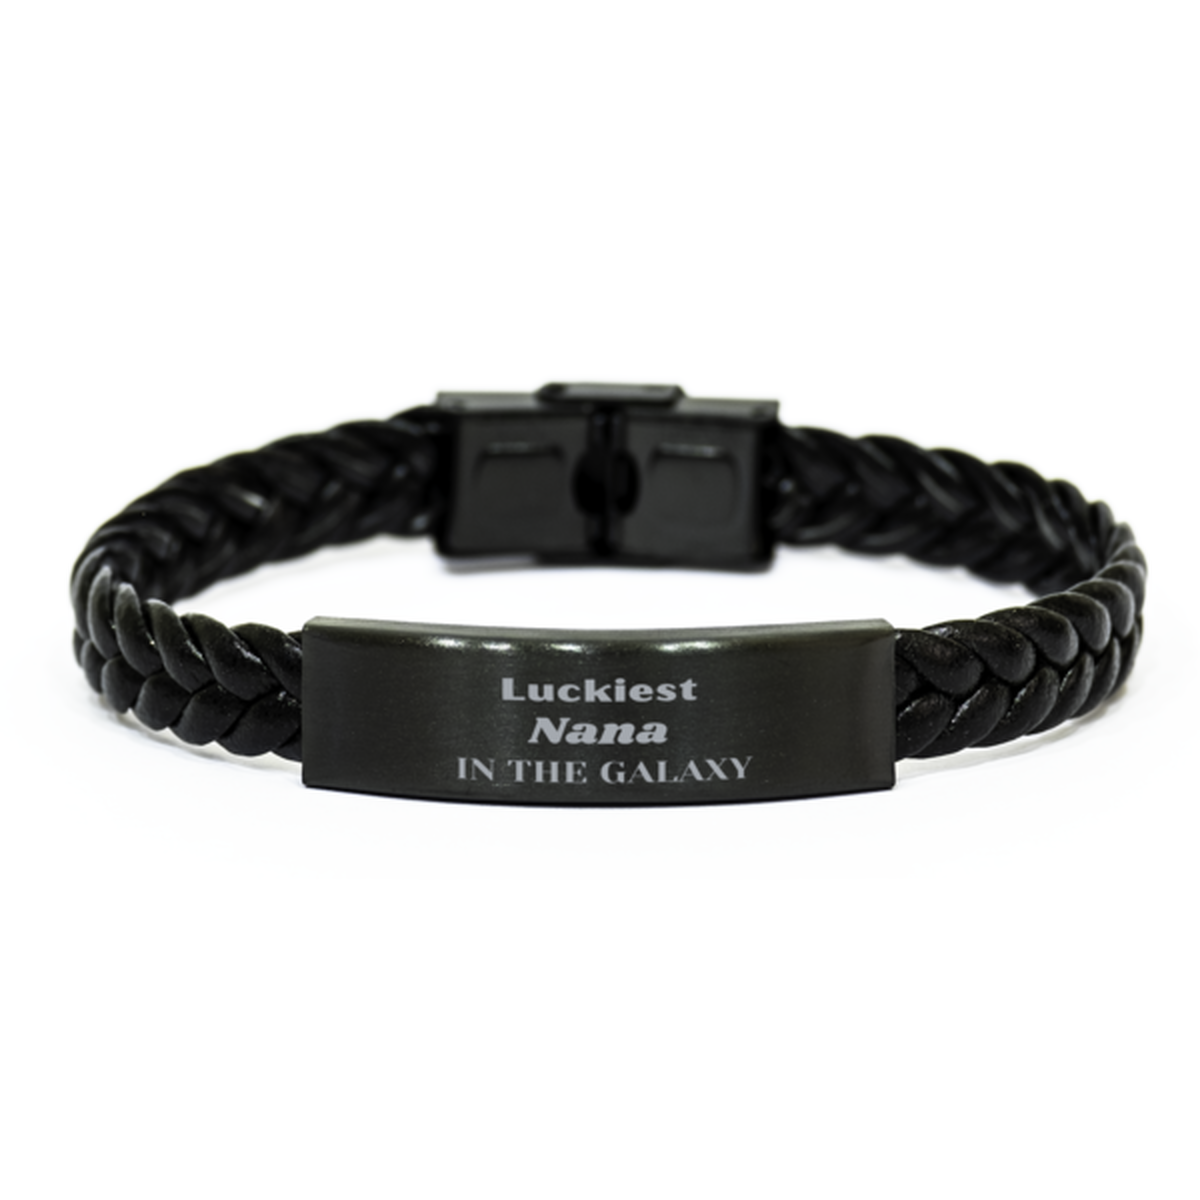 Luckiest Nana in the Galaxy, To My Nana Engraved Gifts, Christmas Nana Braided Leather Bracelet Gifts, X-mas Birthday Unique Gifts For Nana Men Women